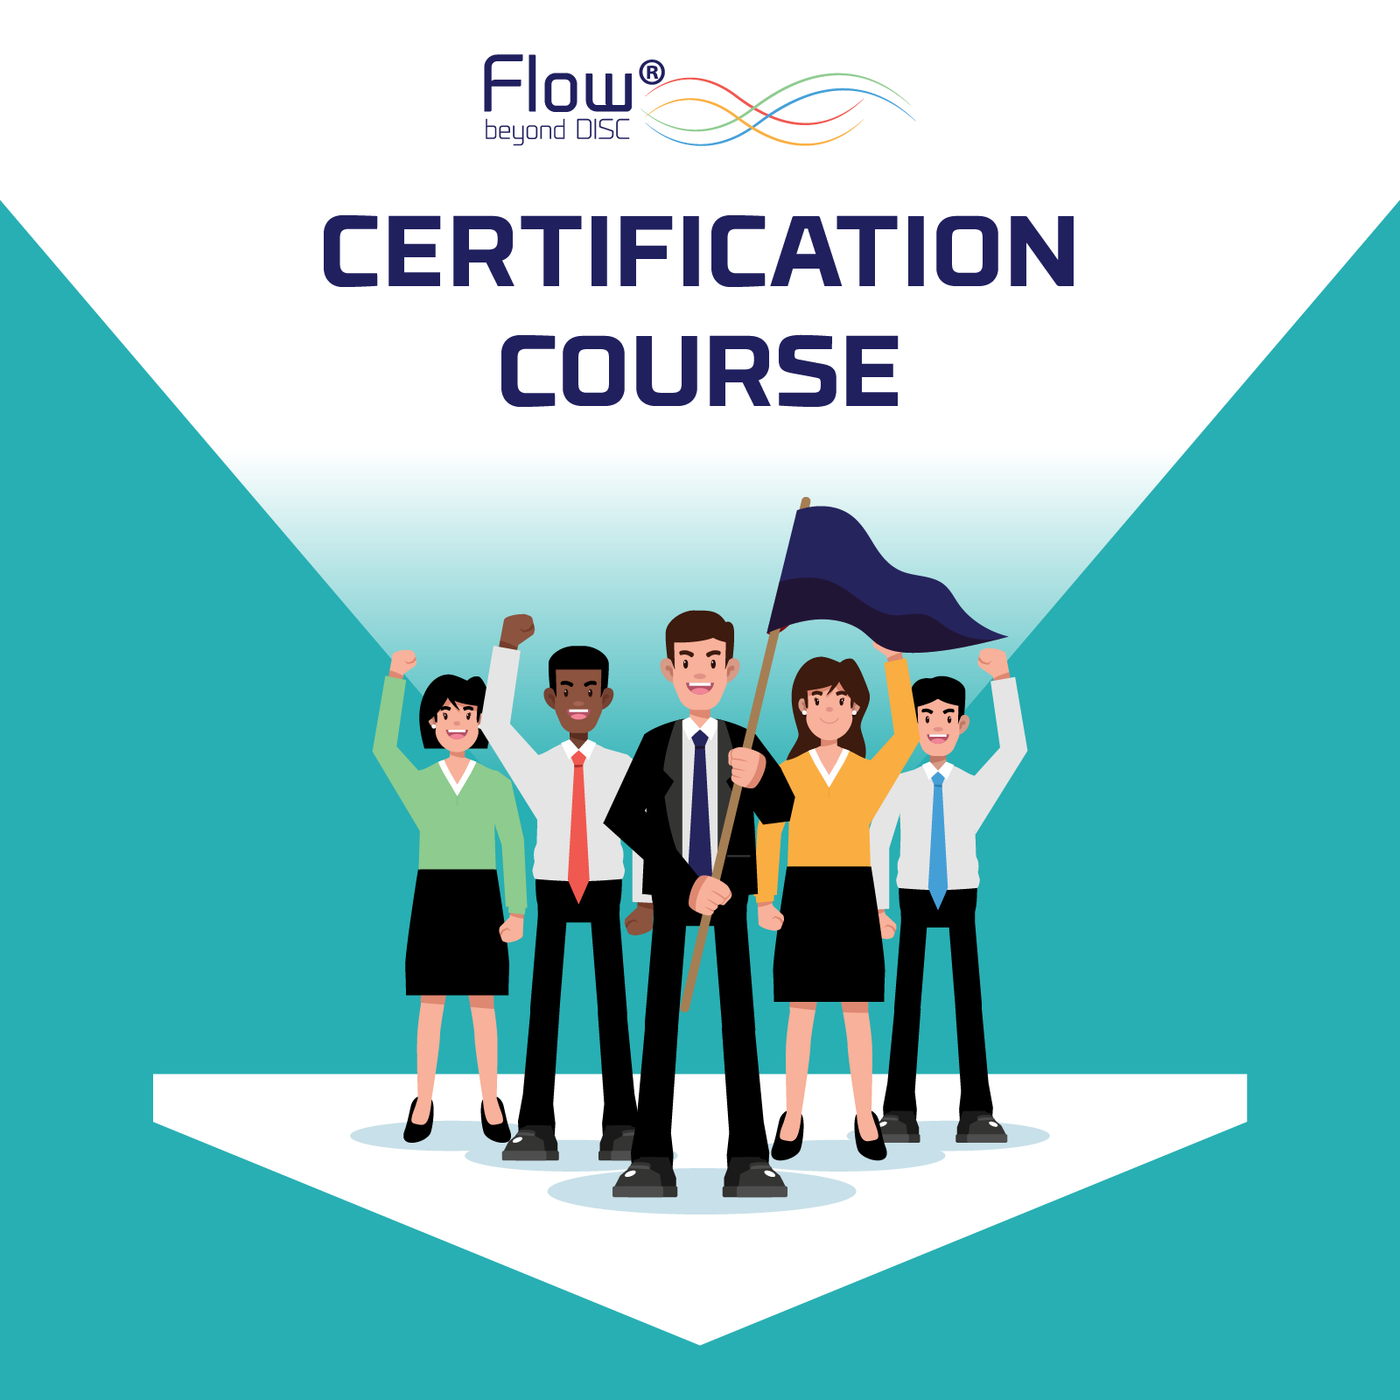 Advanced Certification Course - receives ICF CCE points